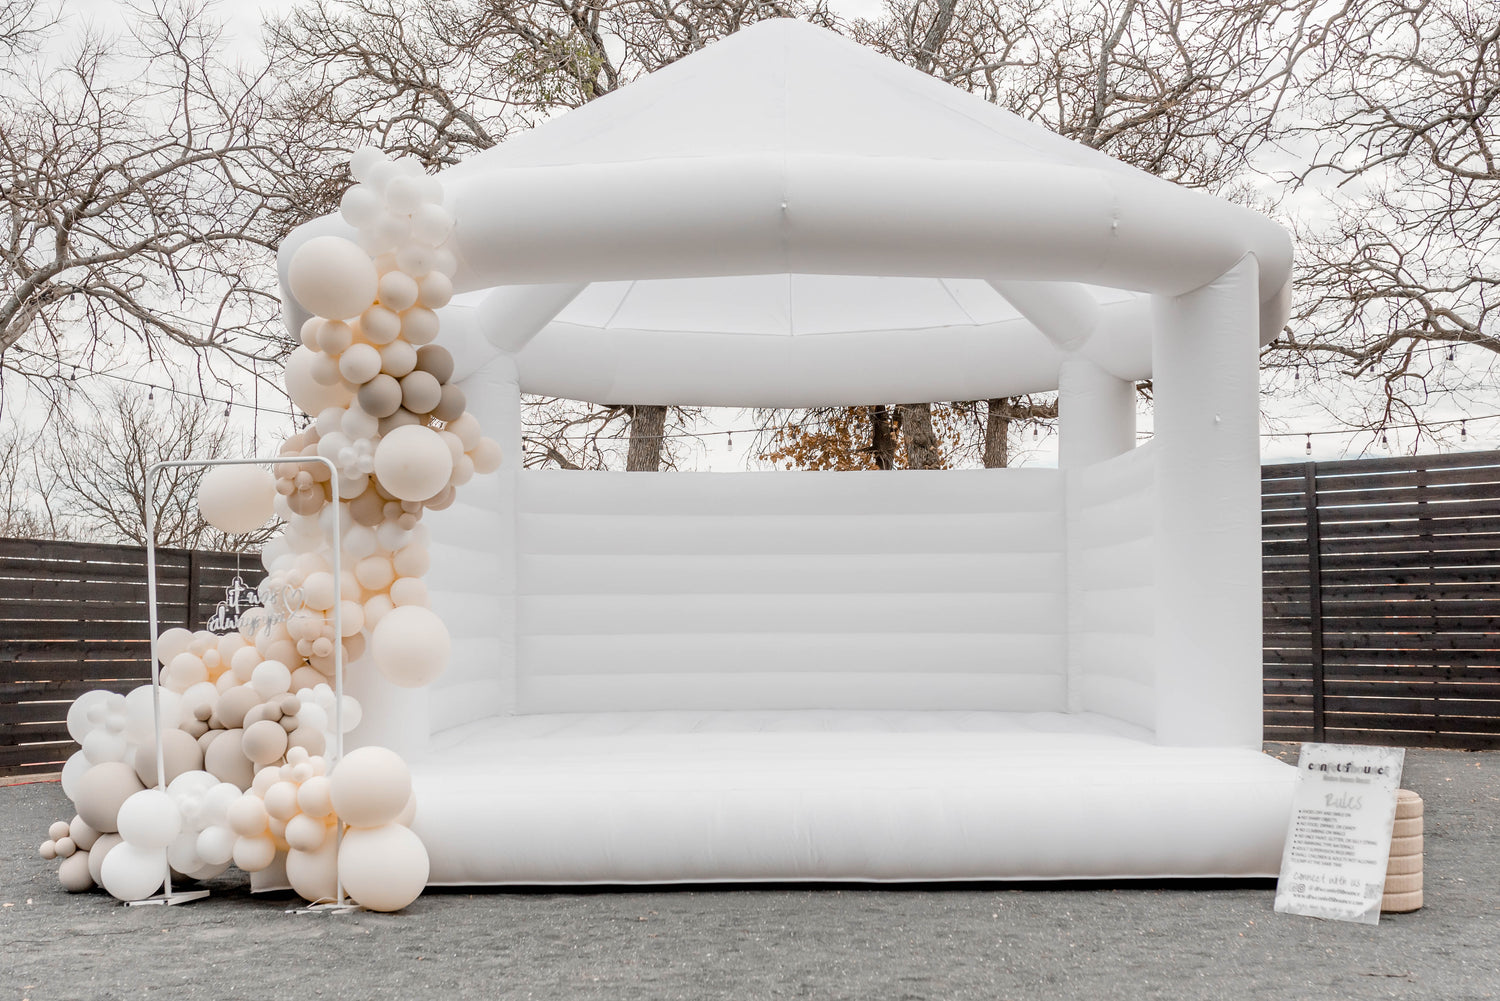 DFW Confetti Bounce, Dallas Fort Worth premiere white bounce house, bubble house and event rental company providing party essentials for all needs and sizes.